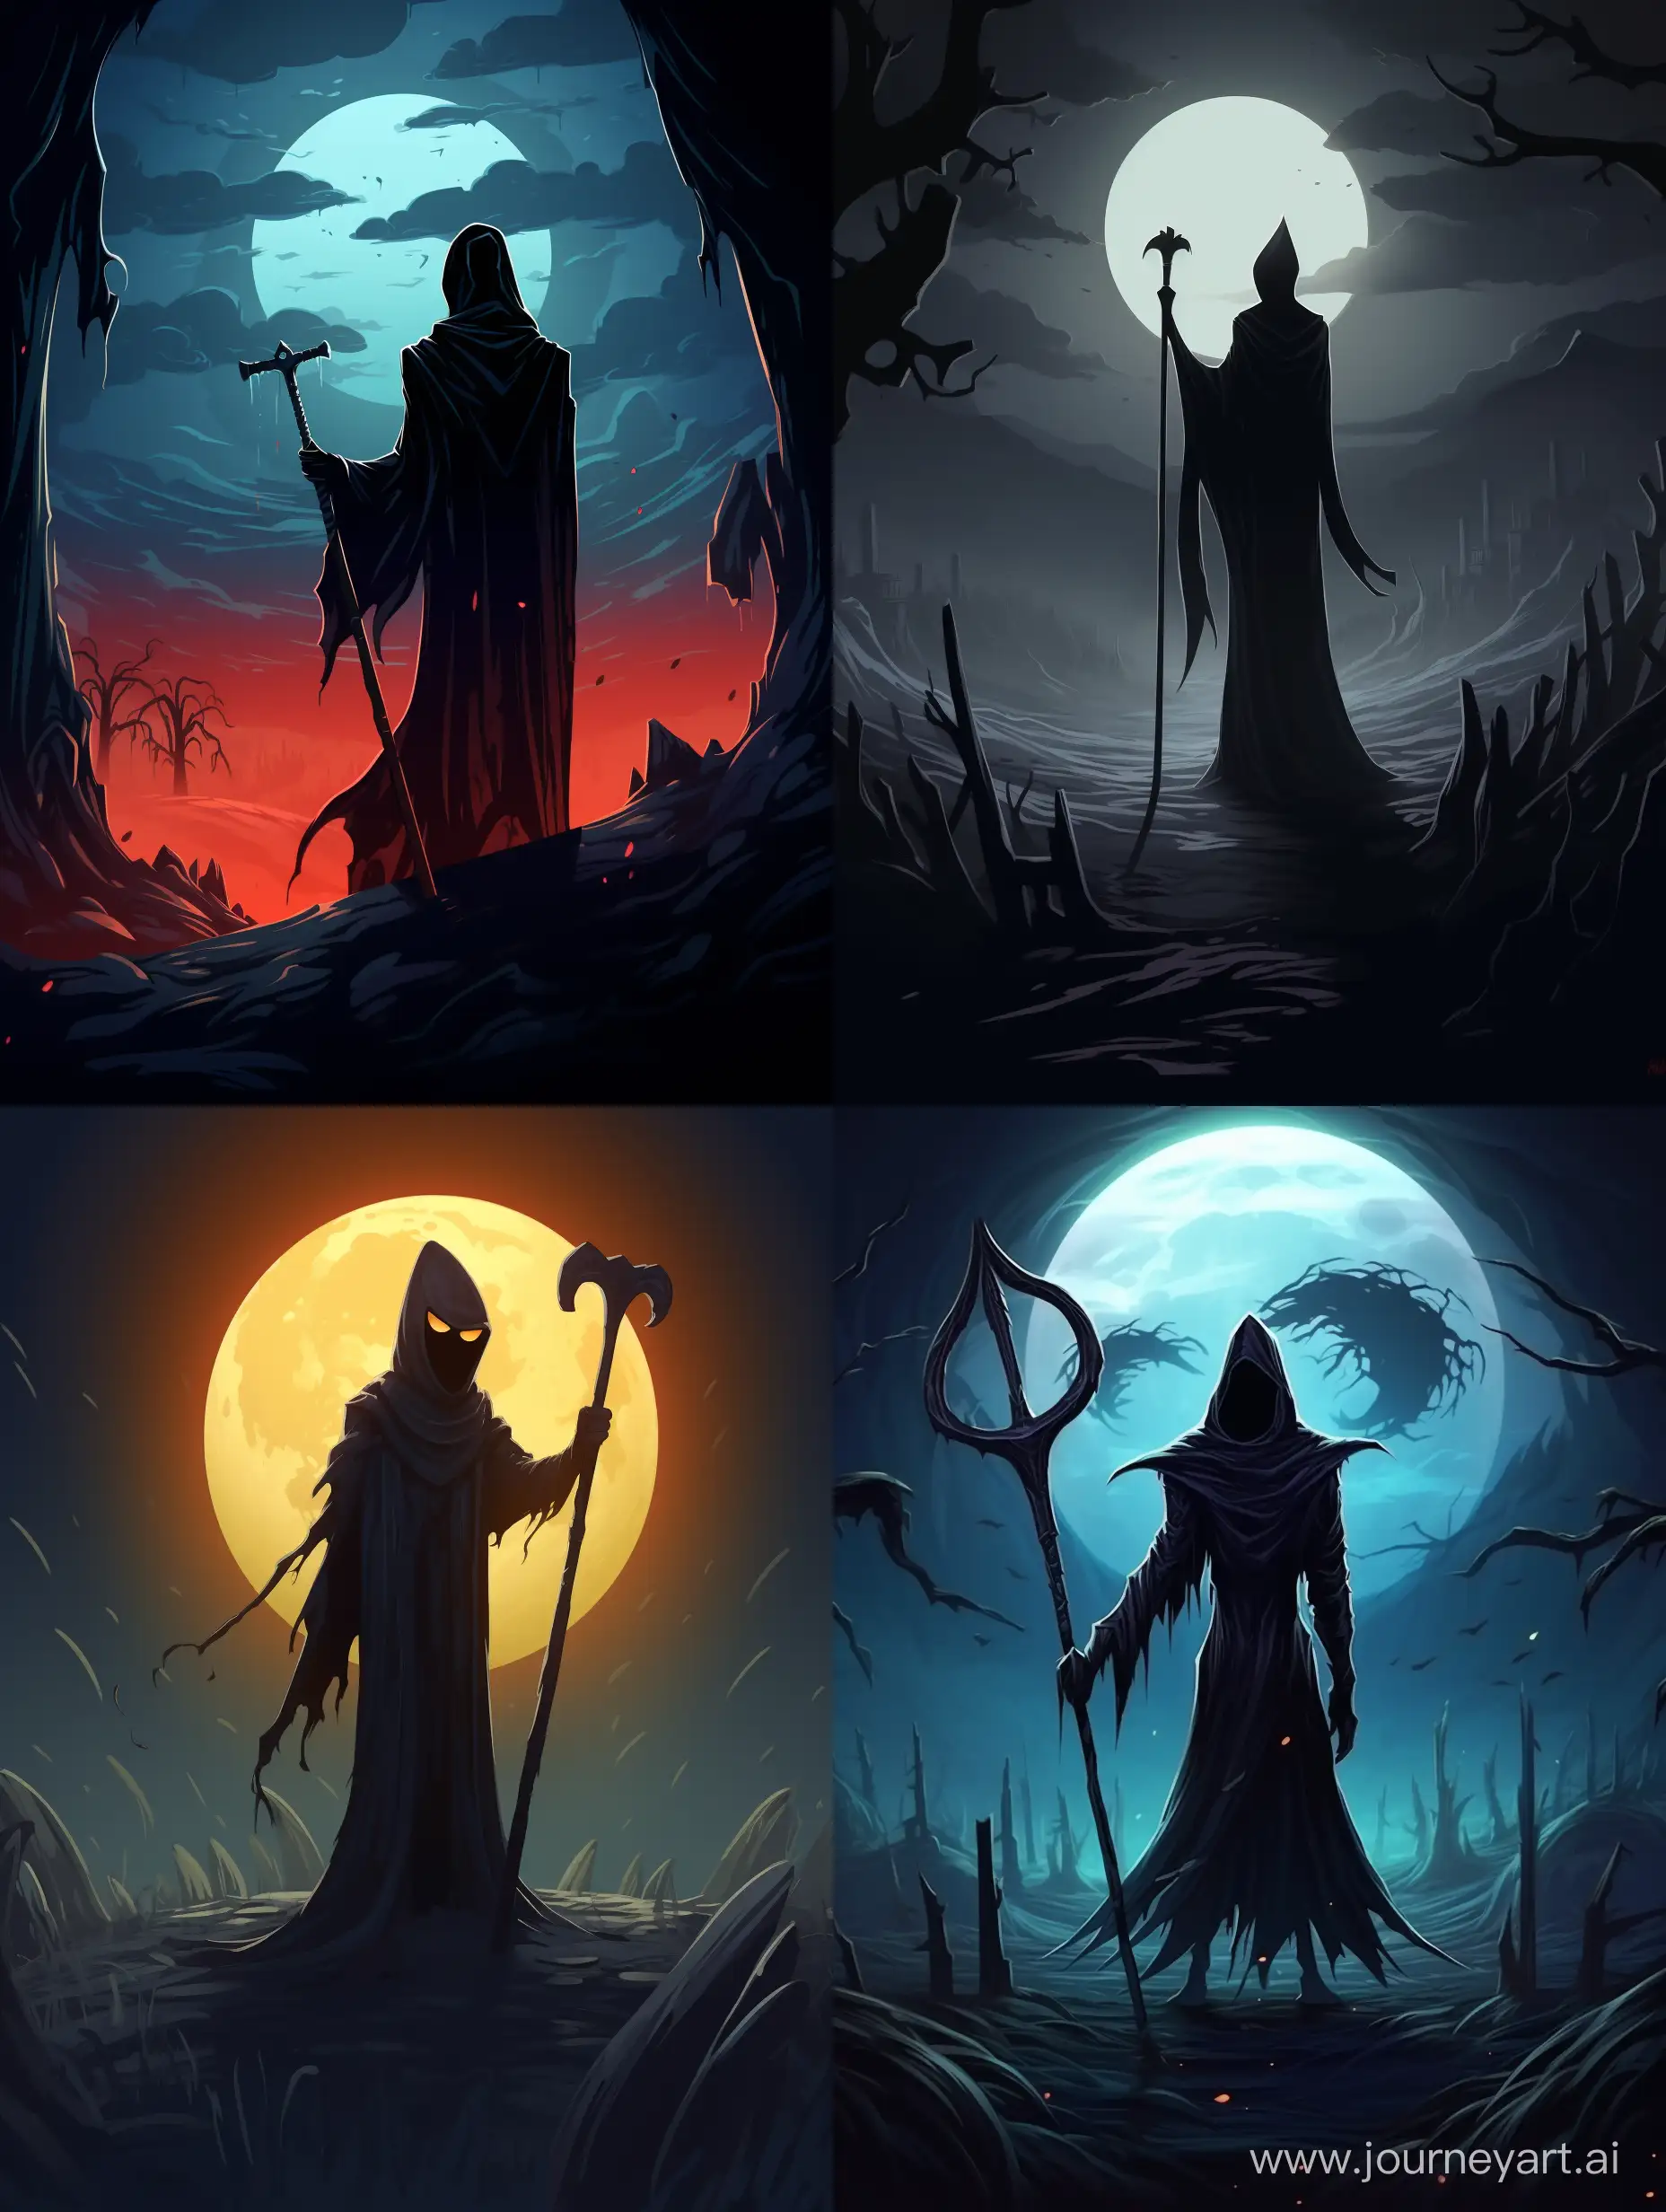 Sinister-Death-Reaper-with-Scythe-in-Pixar-Style-Night-Scene